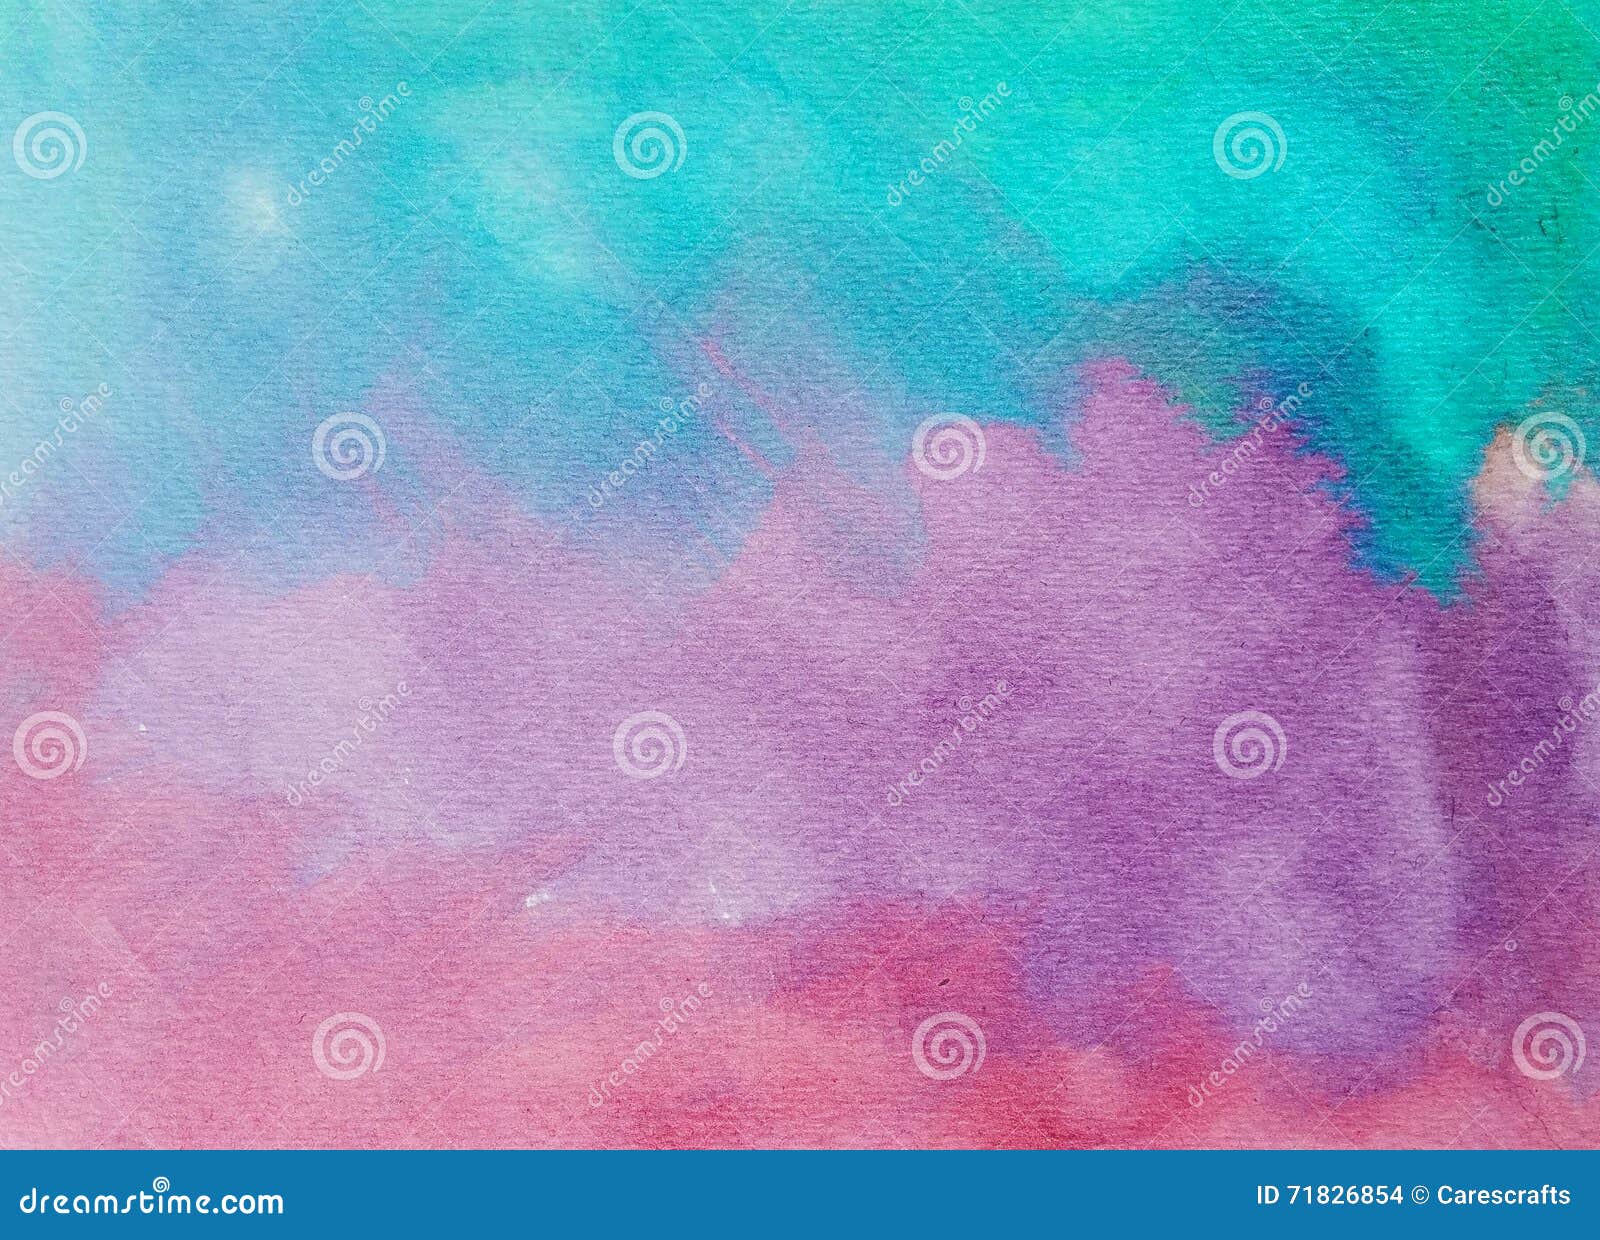 Hand Painted Abstract Watercolor Texture Blue Purple And ...